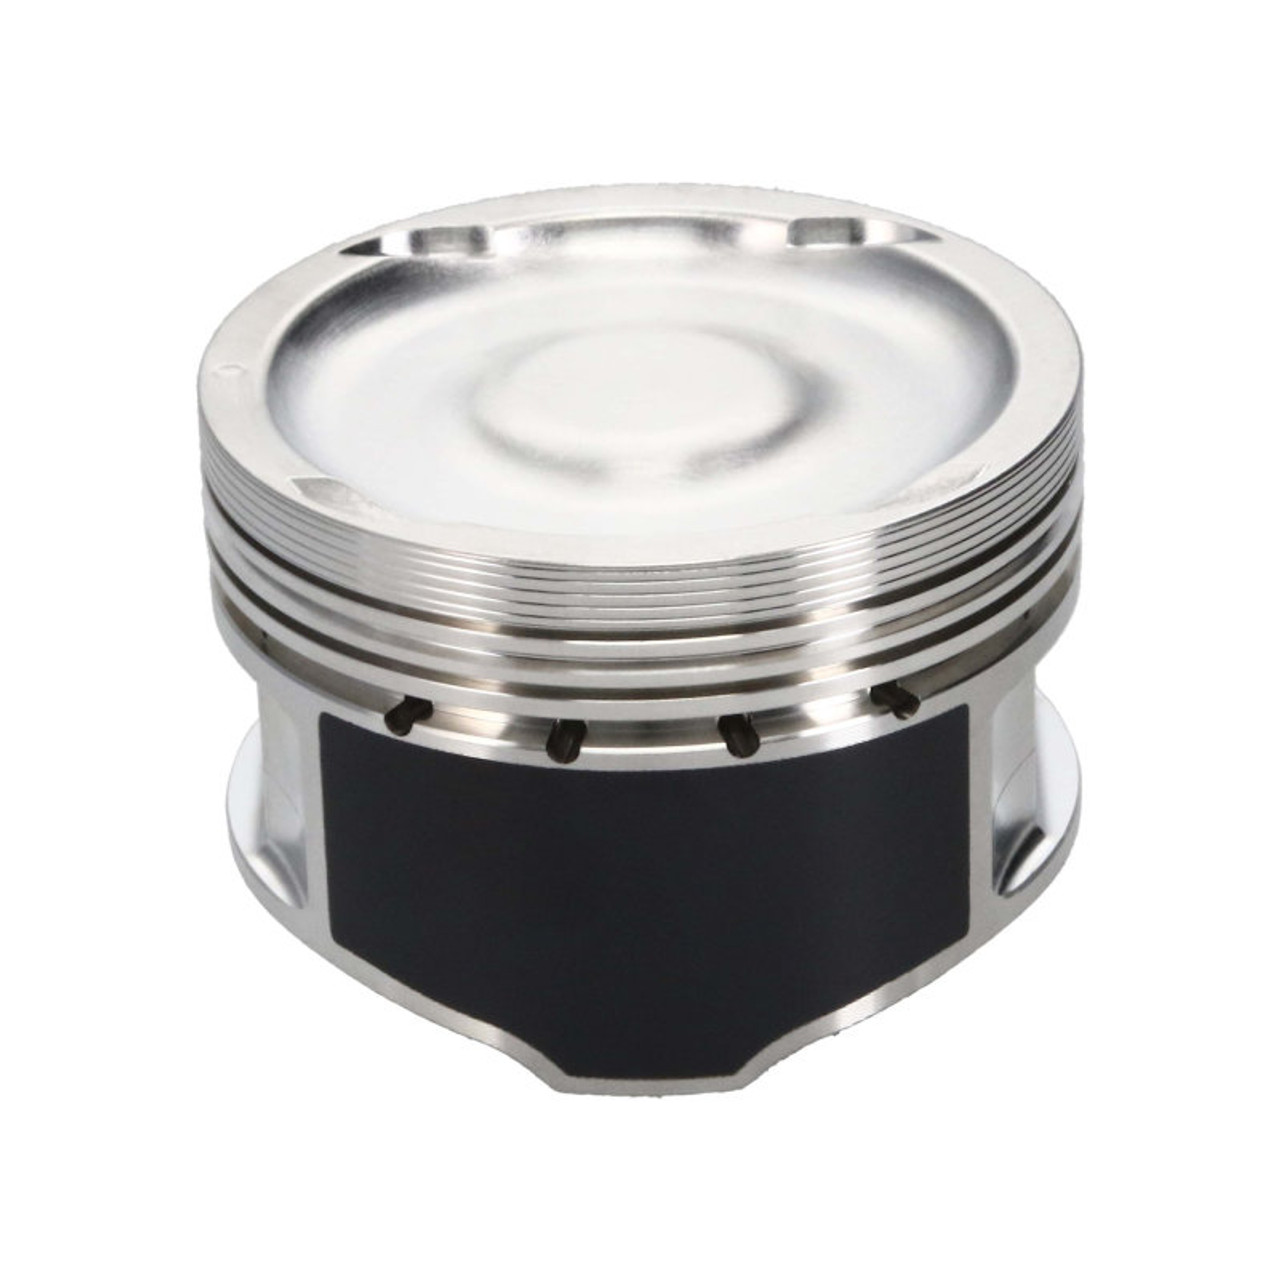 Wiseco Focus RS 2.5L 20V Turbo 83mm Bore 8.5 CR -15.2cc Dish Pistons - Set of 5 *SPECIAL ORDER* - KE327M83 User 5